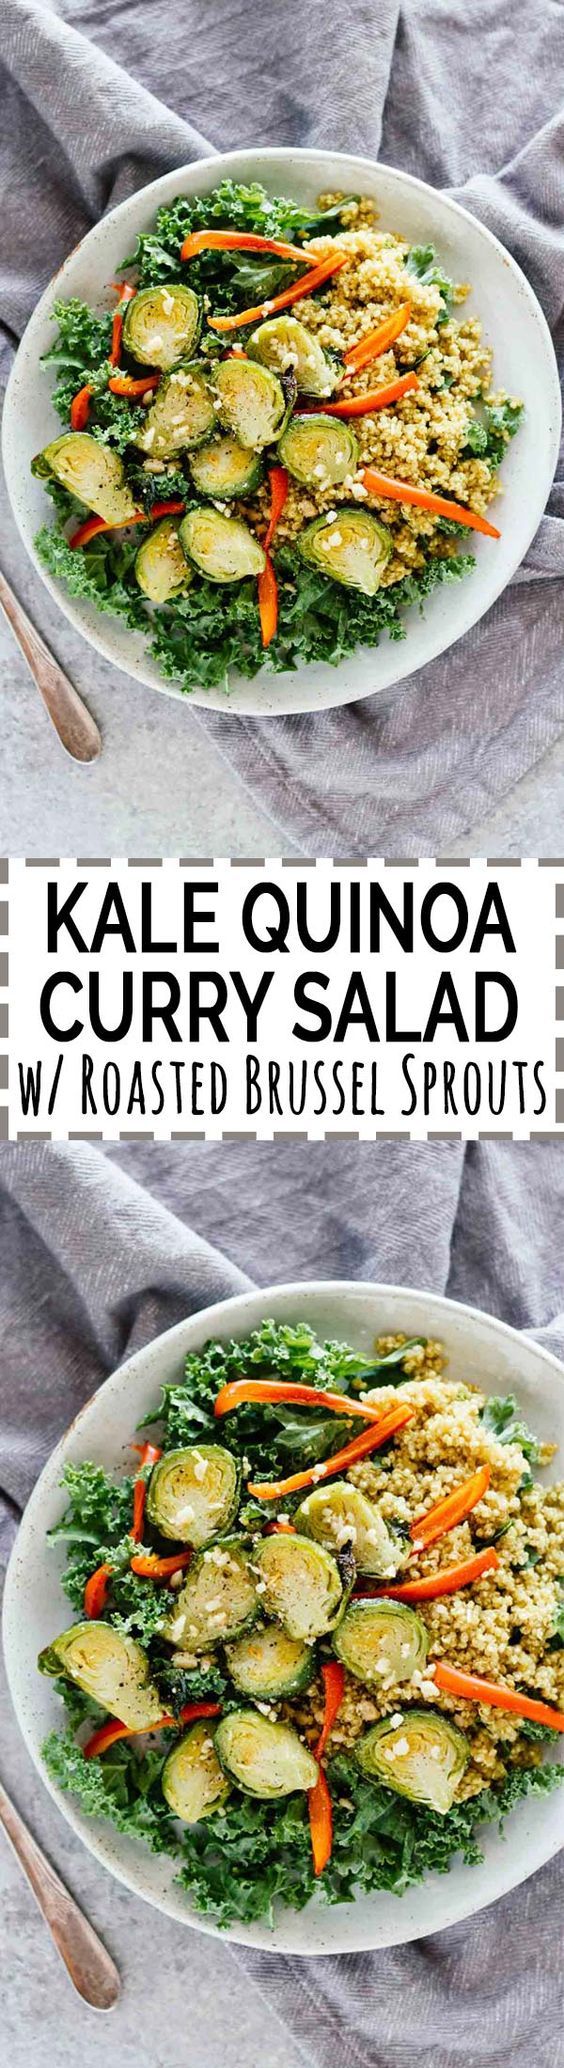 Kale Quinoa Curry Salad w/ Roasted Brussel Sprouts